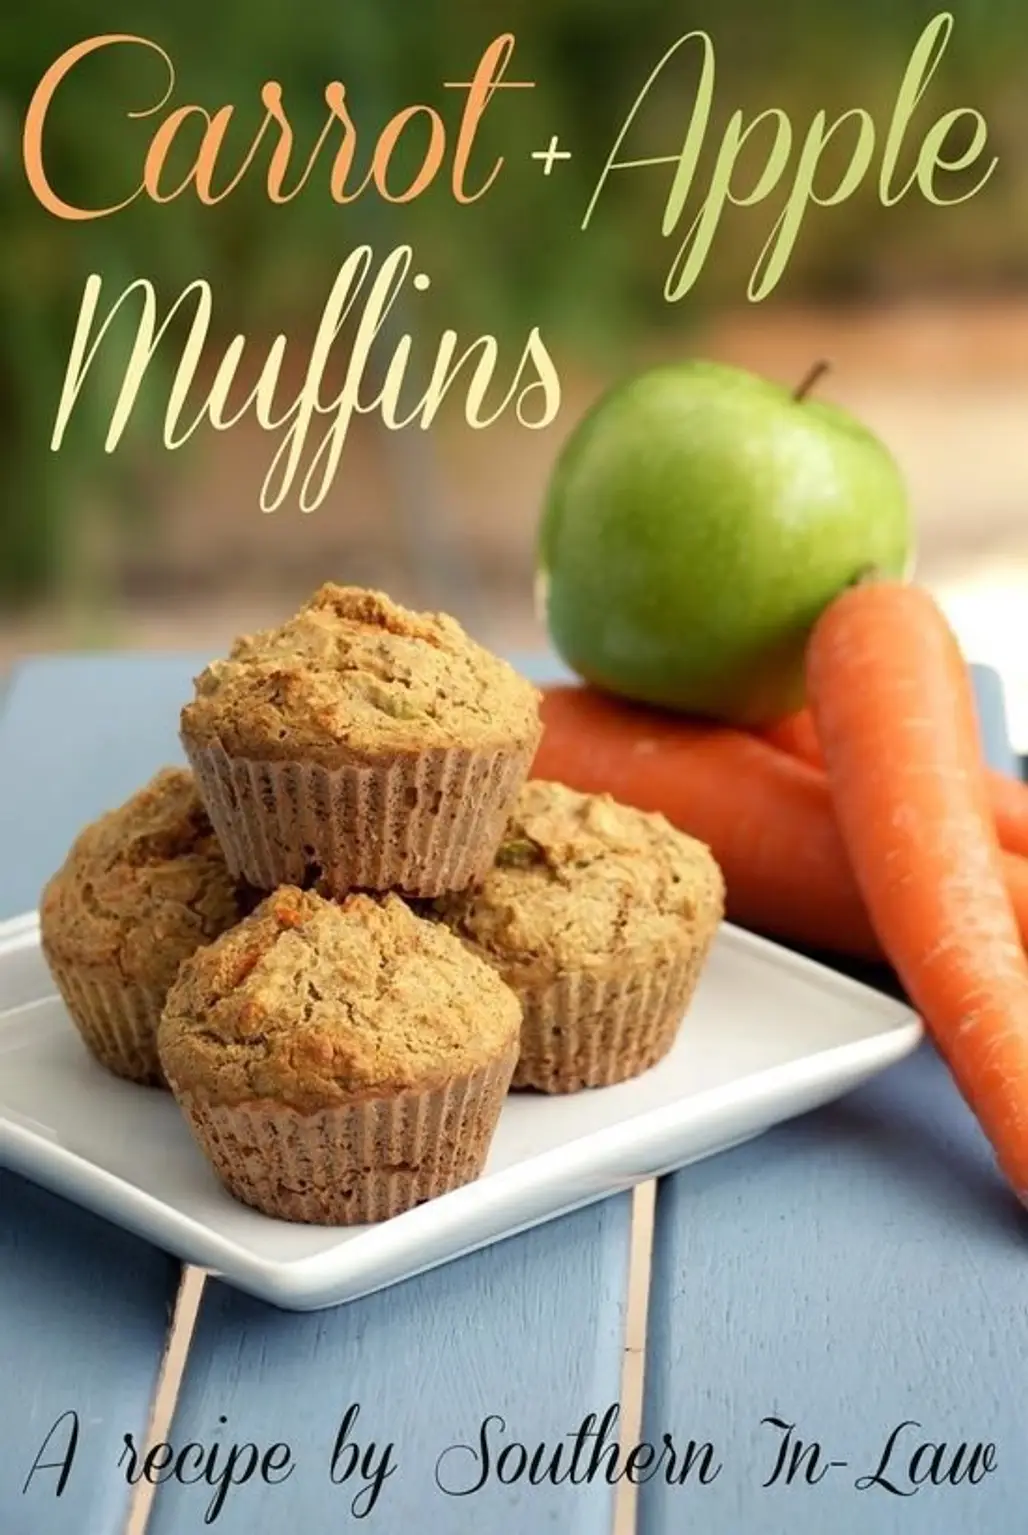 Healthy Carrot and Apple Muffins